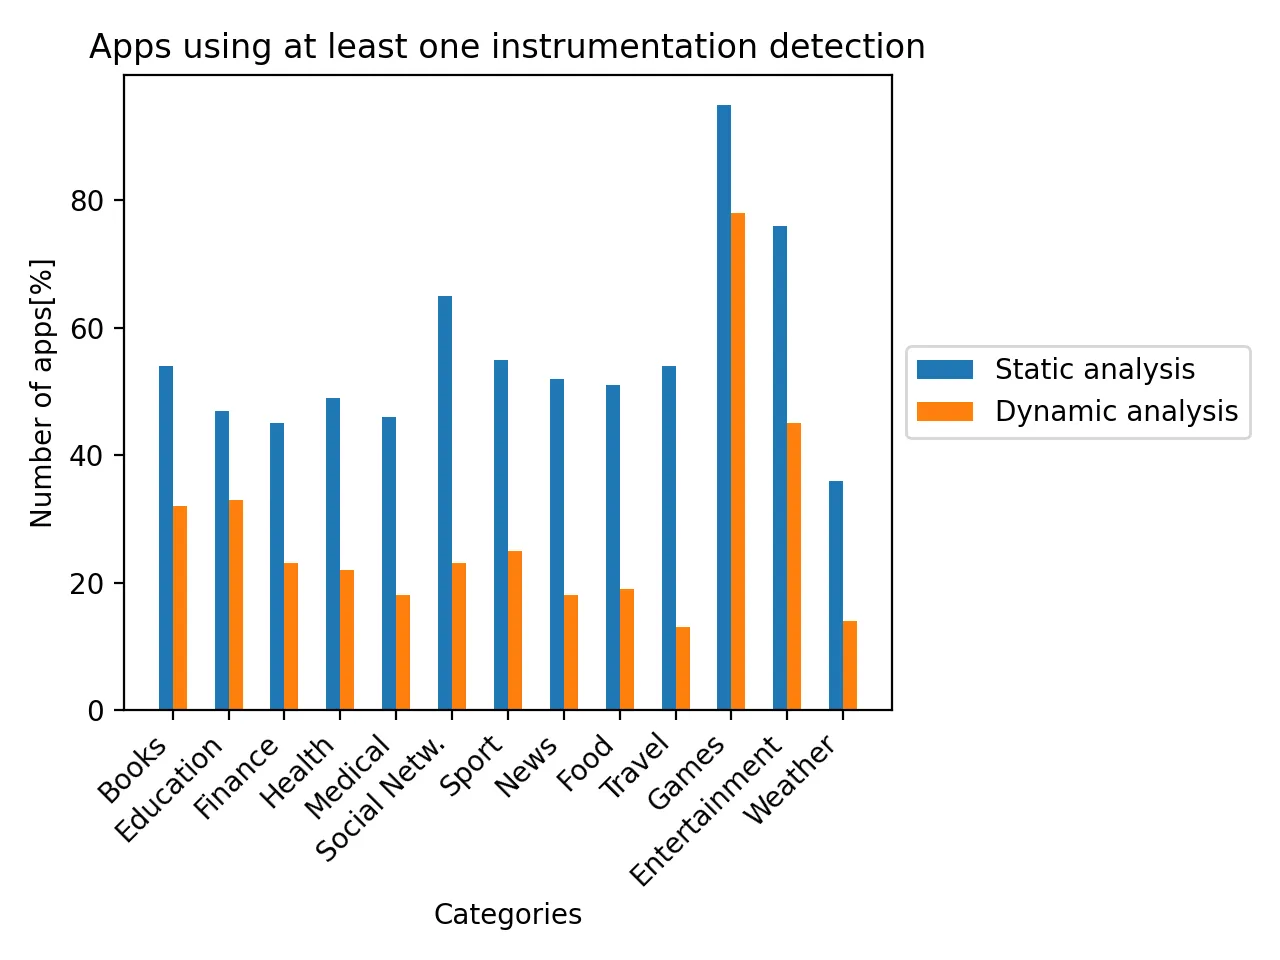 Apps using at least one instrumentation detection